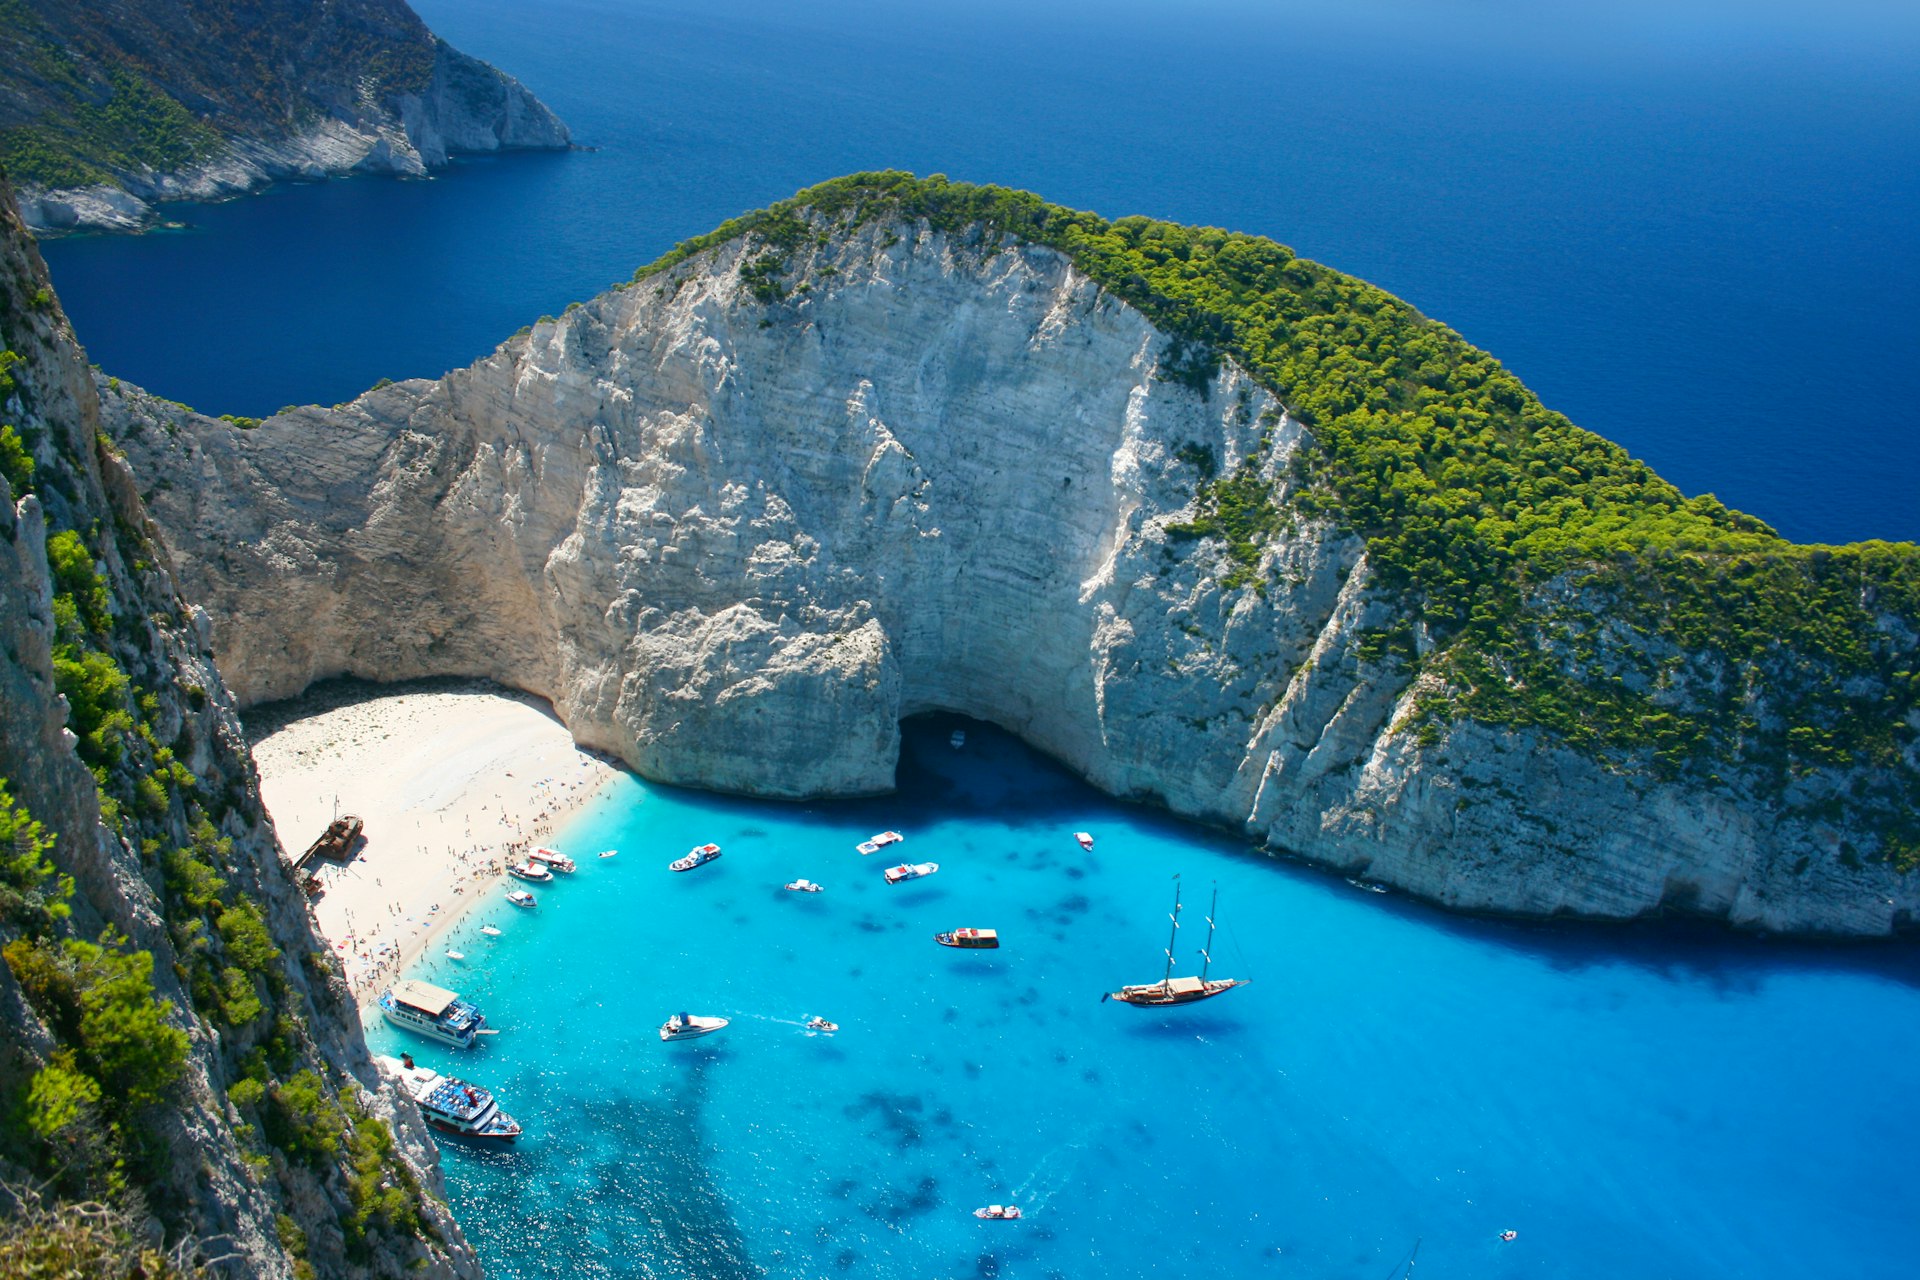 An aerial view of Navagio Beach, a sheltered cove in Greece with white sand, blue waters and a large wrecked ship on the shore.